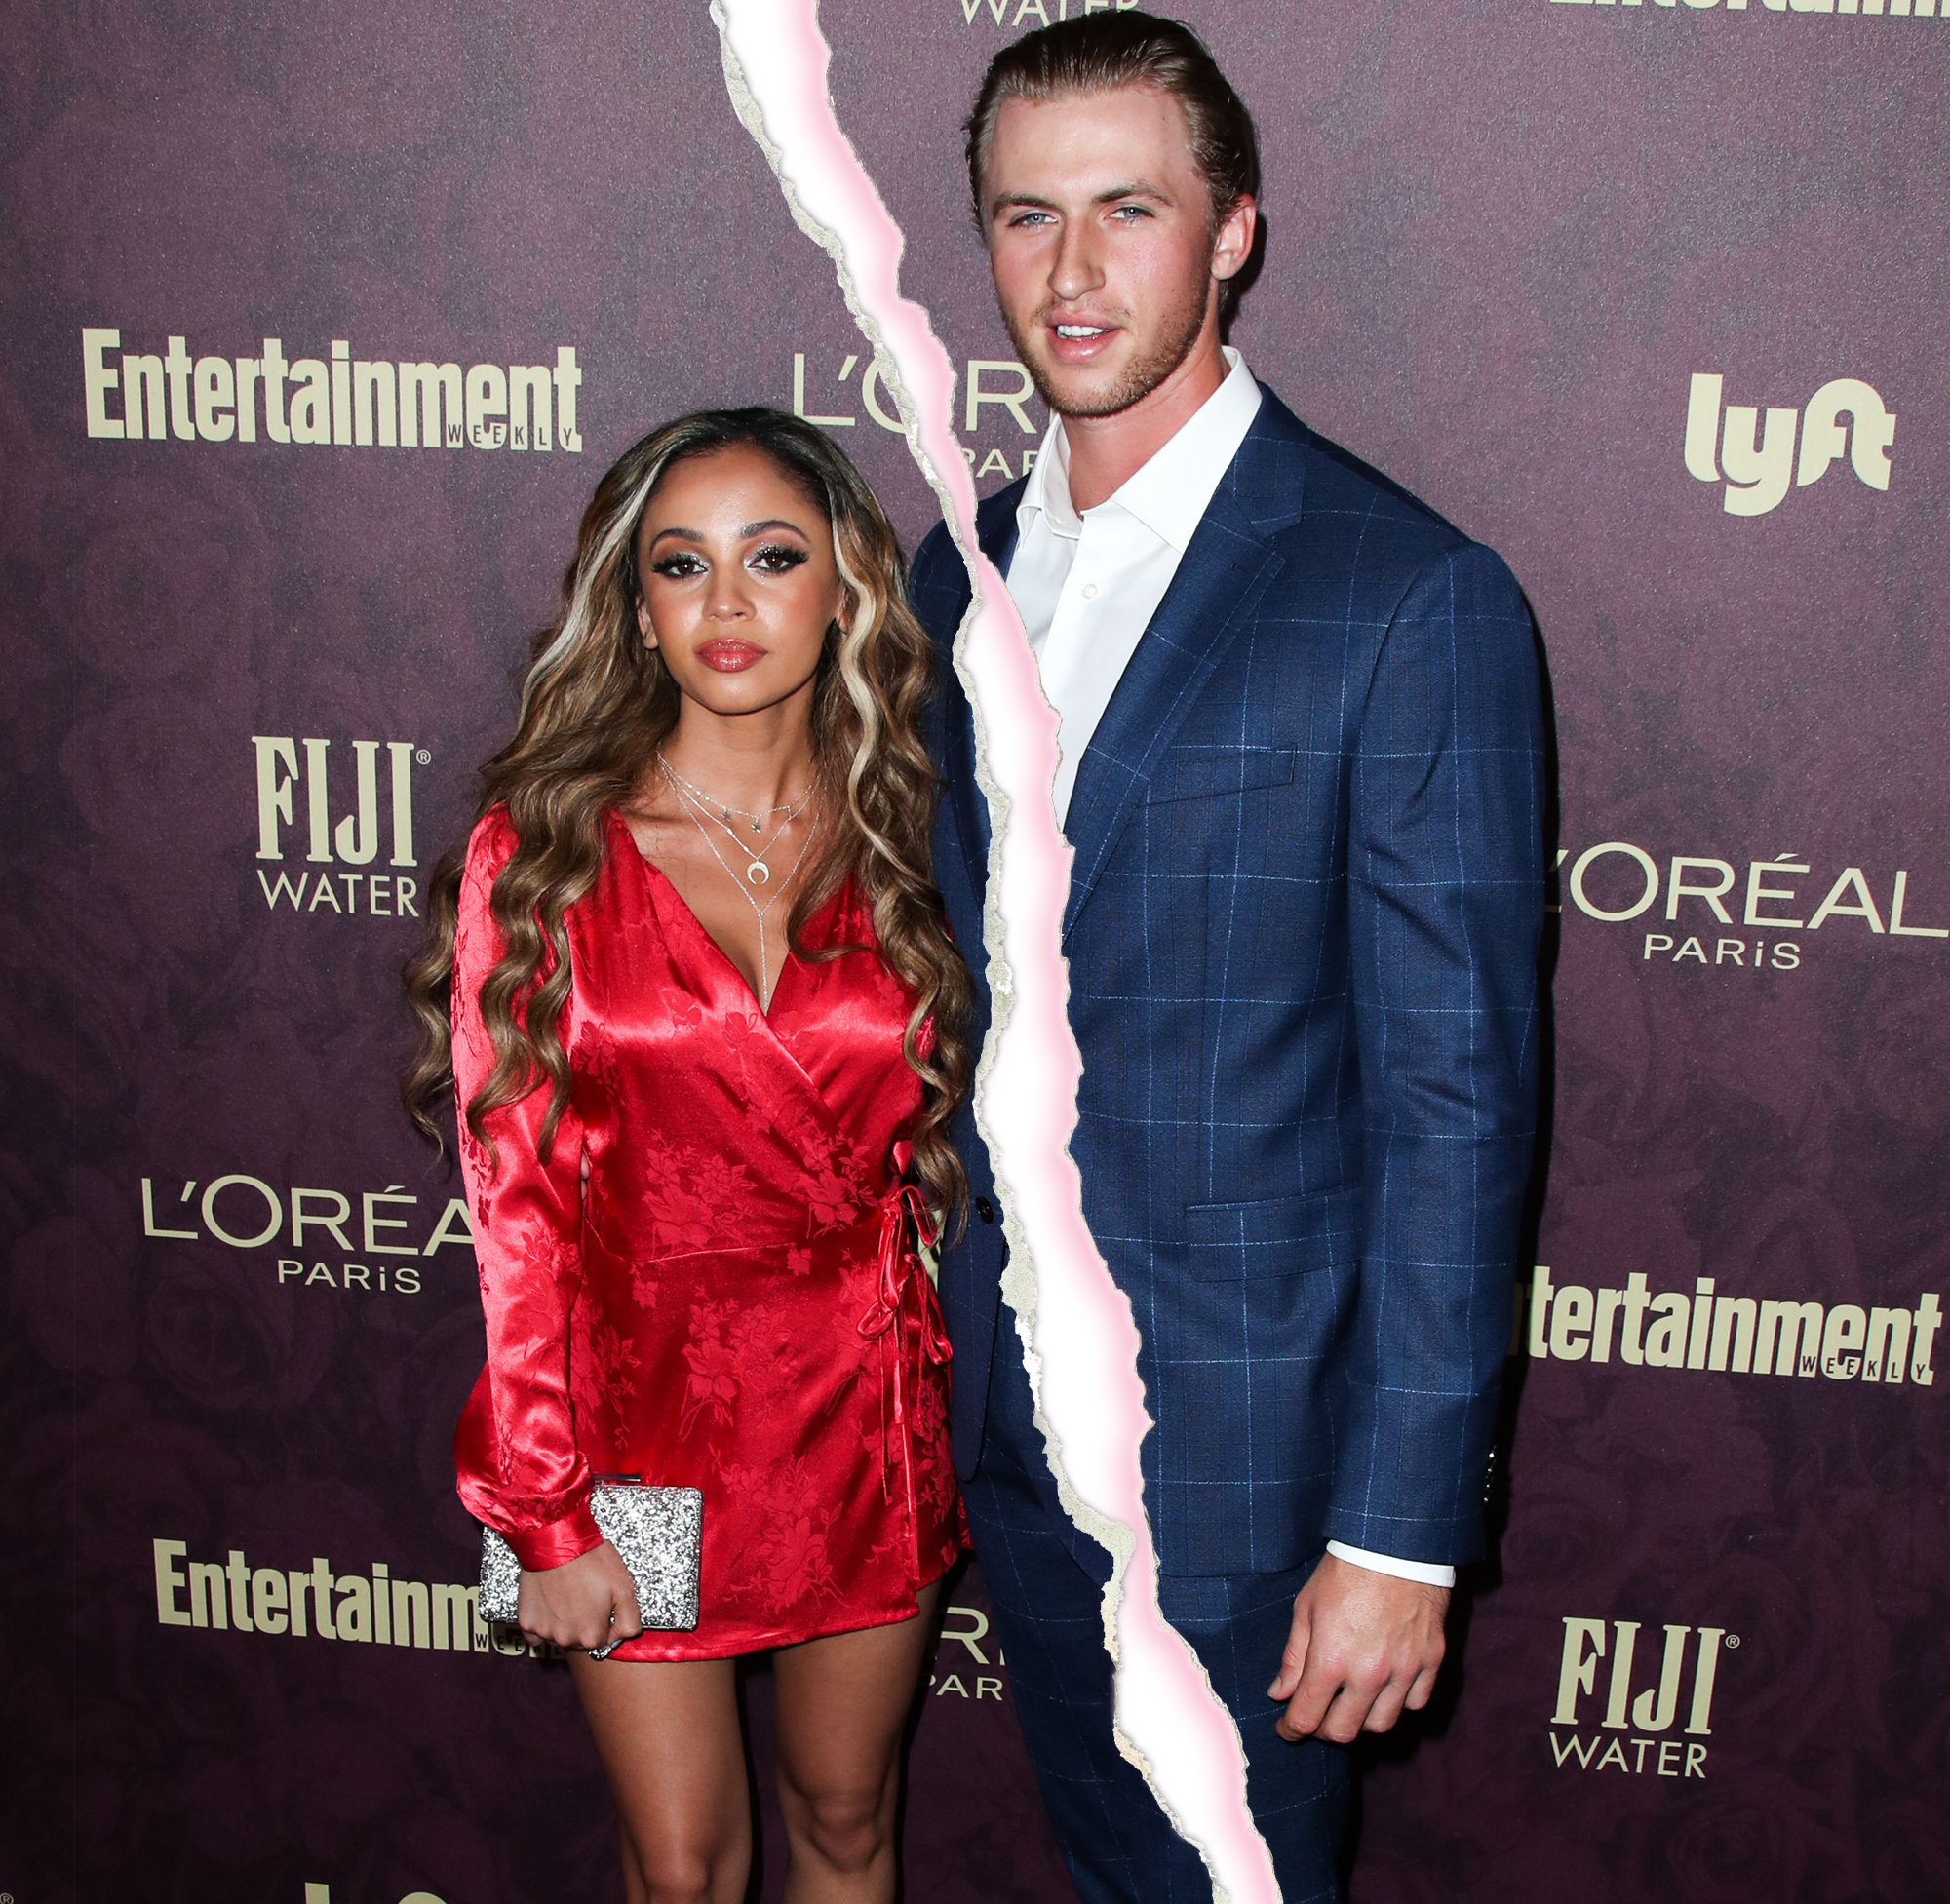 Michael Kopech Files For Divorce From Vanessa Morgan After Baby News